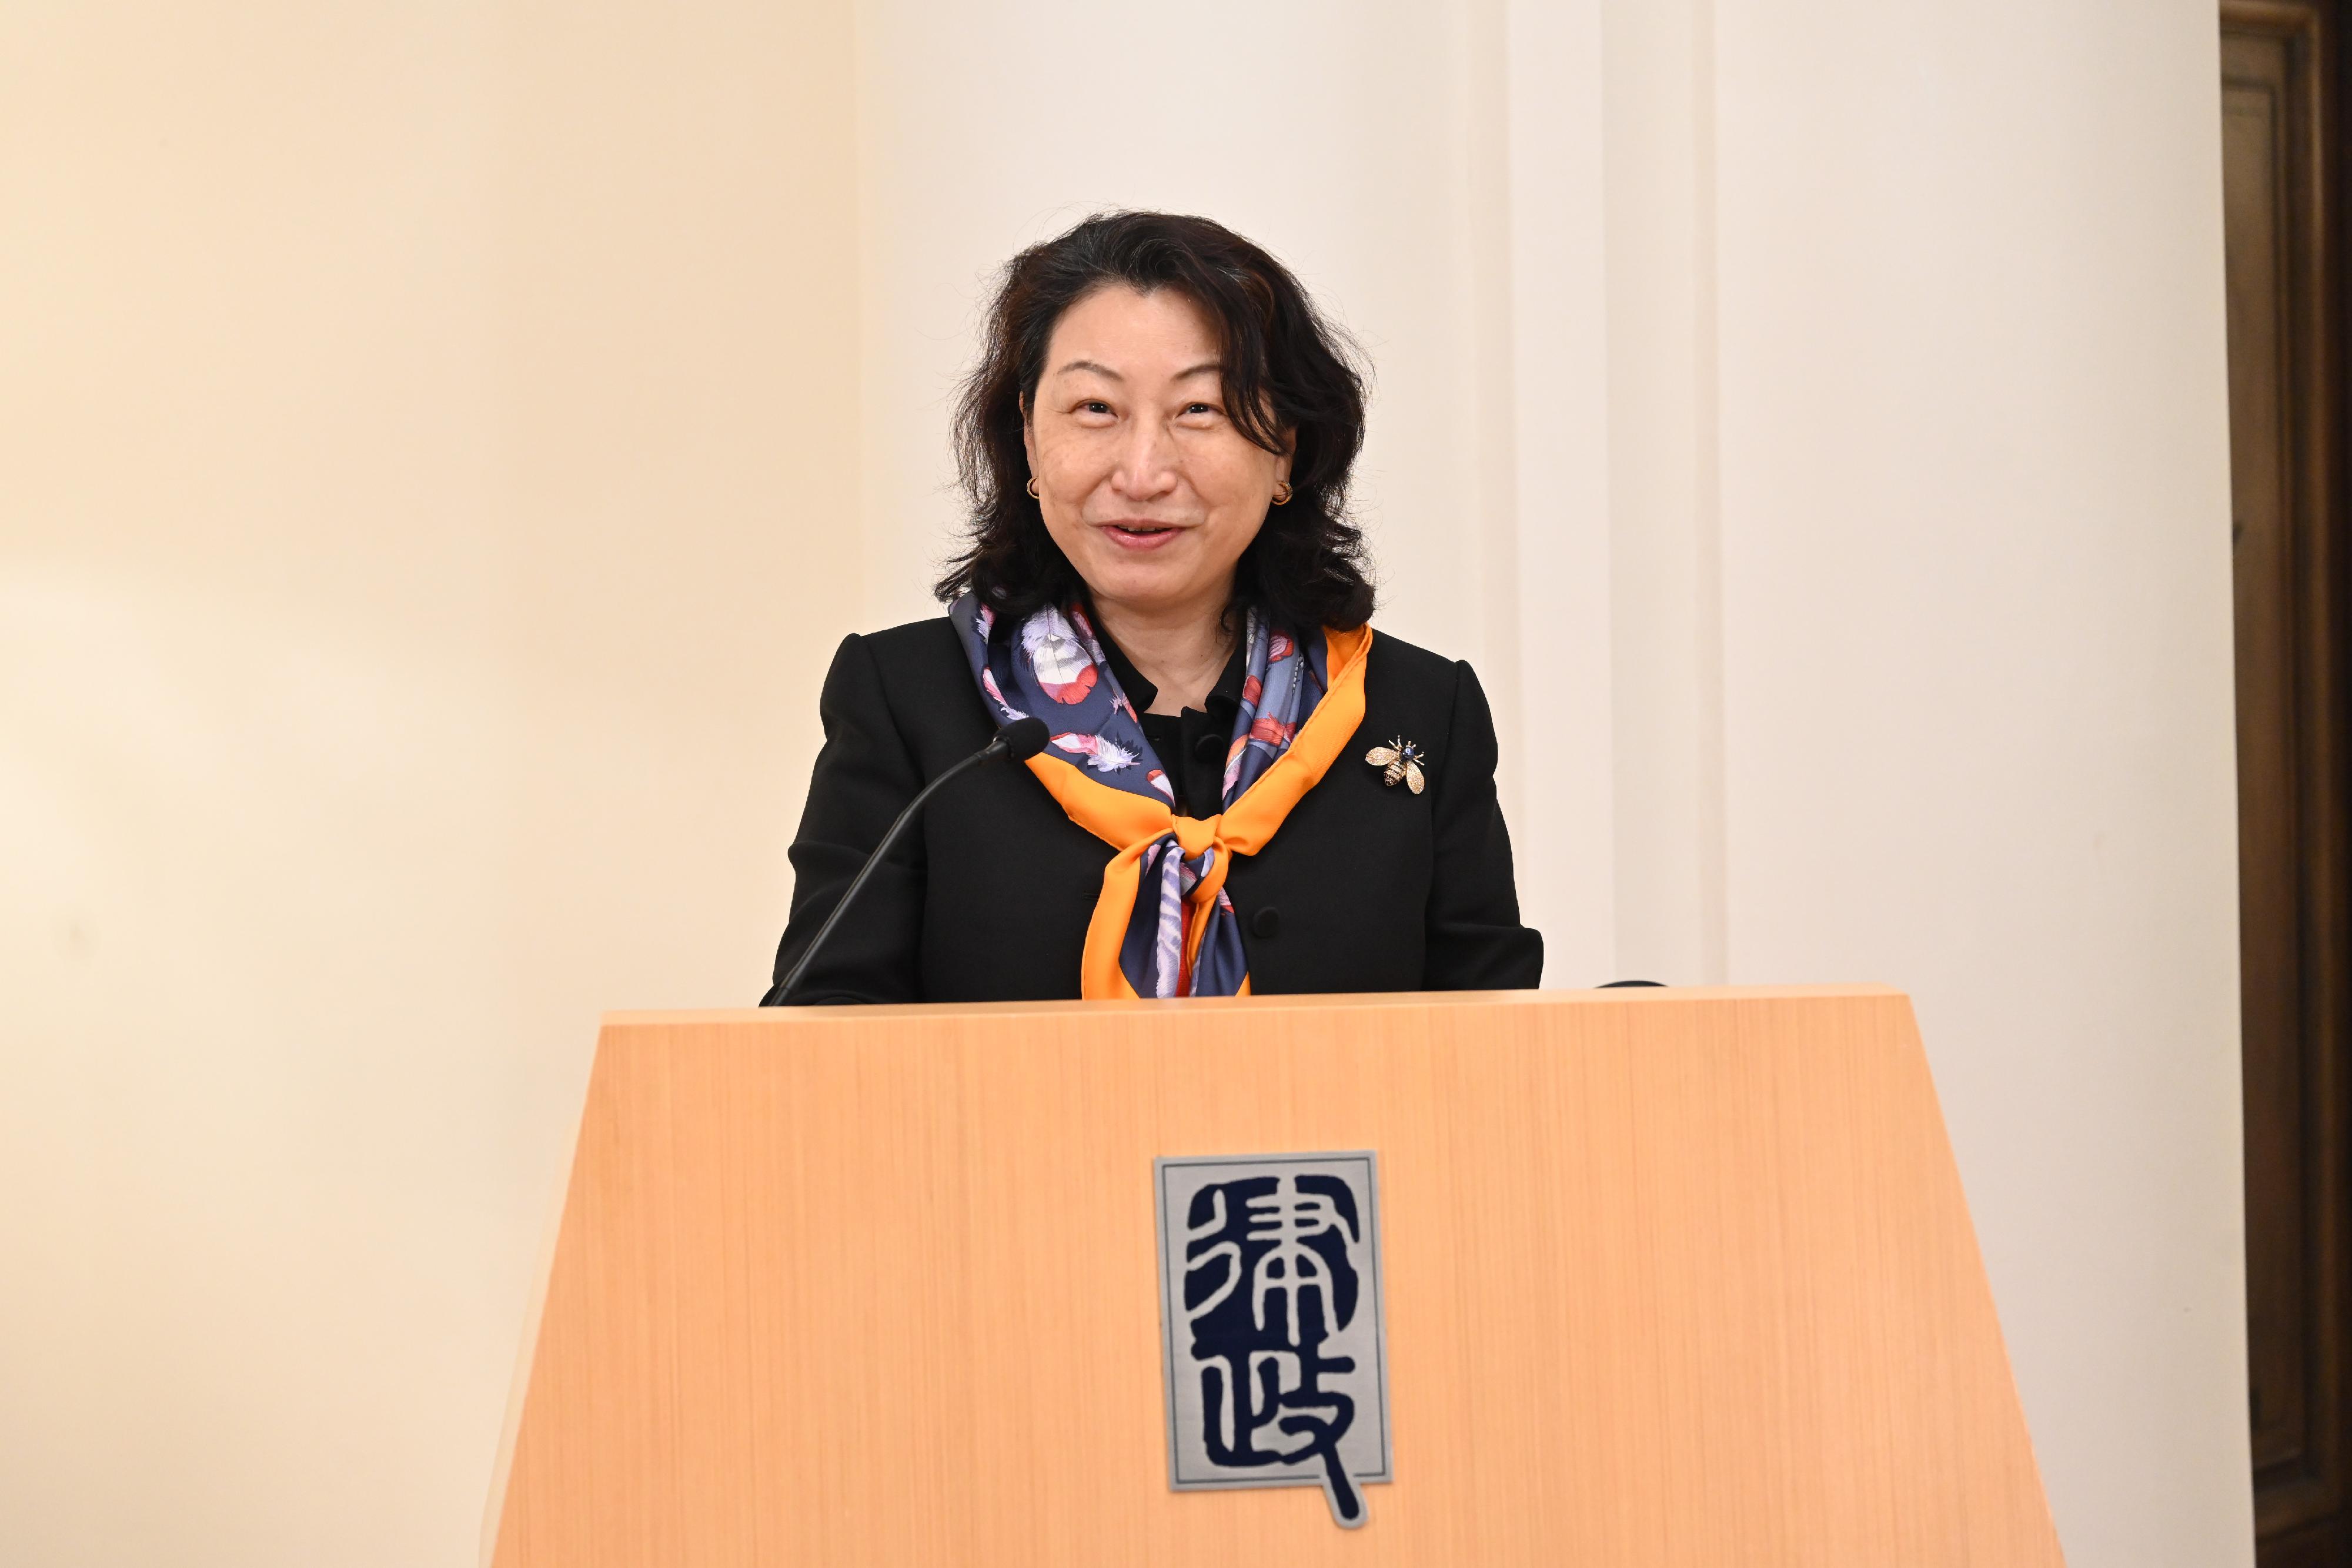 The Secretary for Justice, Ms Teresa Cheng, SC and the President of the International Institute for the Unification of Private Law, Professor Maria Chiara Malaguti, signed a memorandum of understanding for the administrative arrangements for collaboration relating to private international law and international commercial law at a virtual signing ceremony today (May 27). Photo shows Ms Cheng delivering opening remarks at the signing ceremony.

